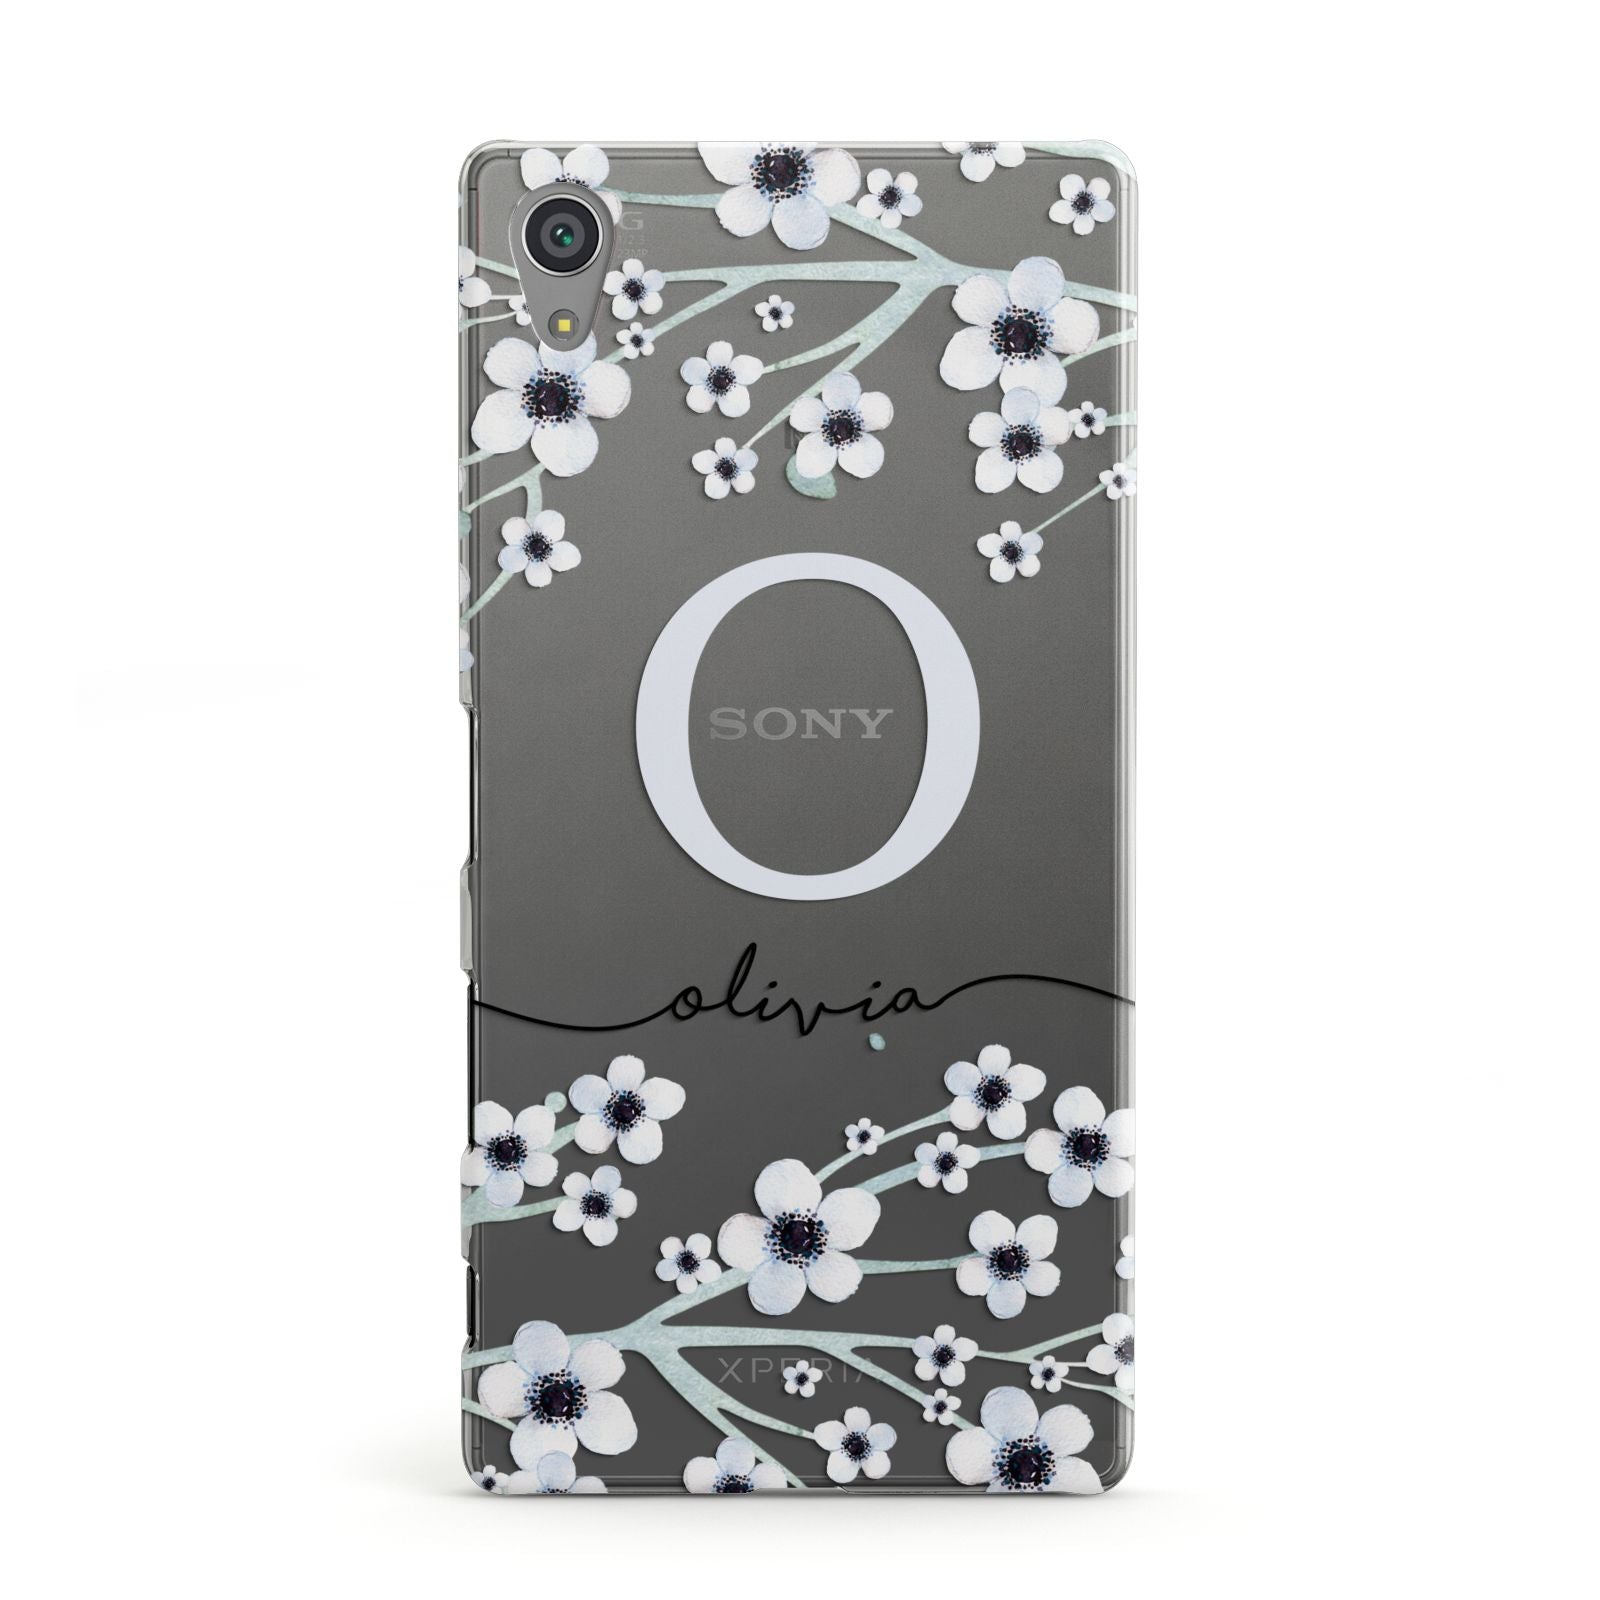 Personalised White Flower Sony Xperia Case